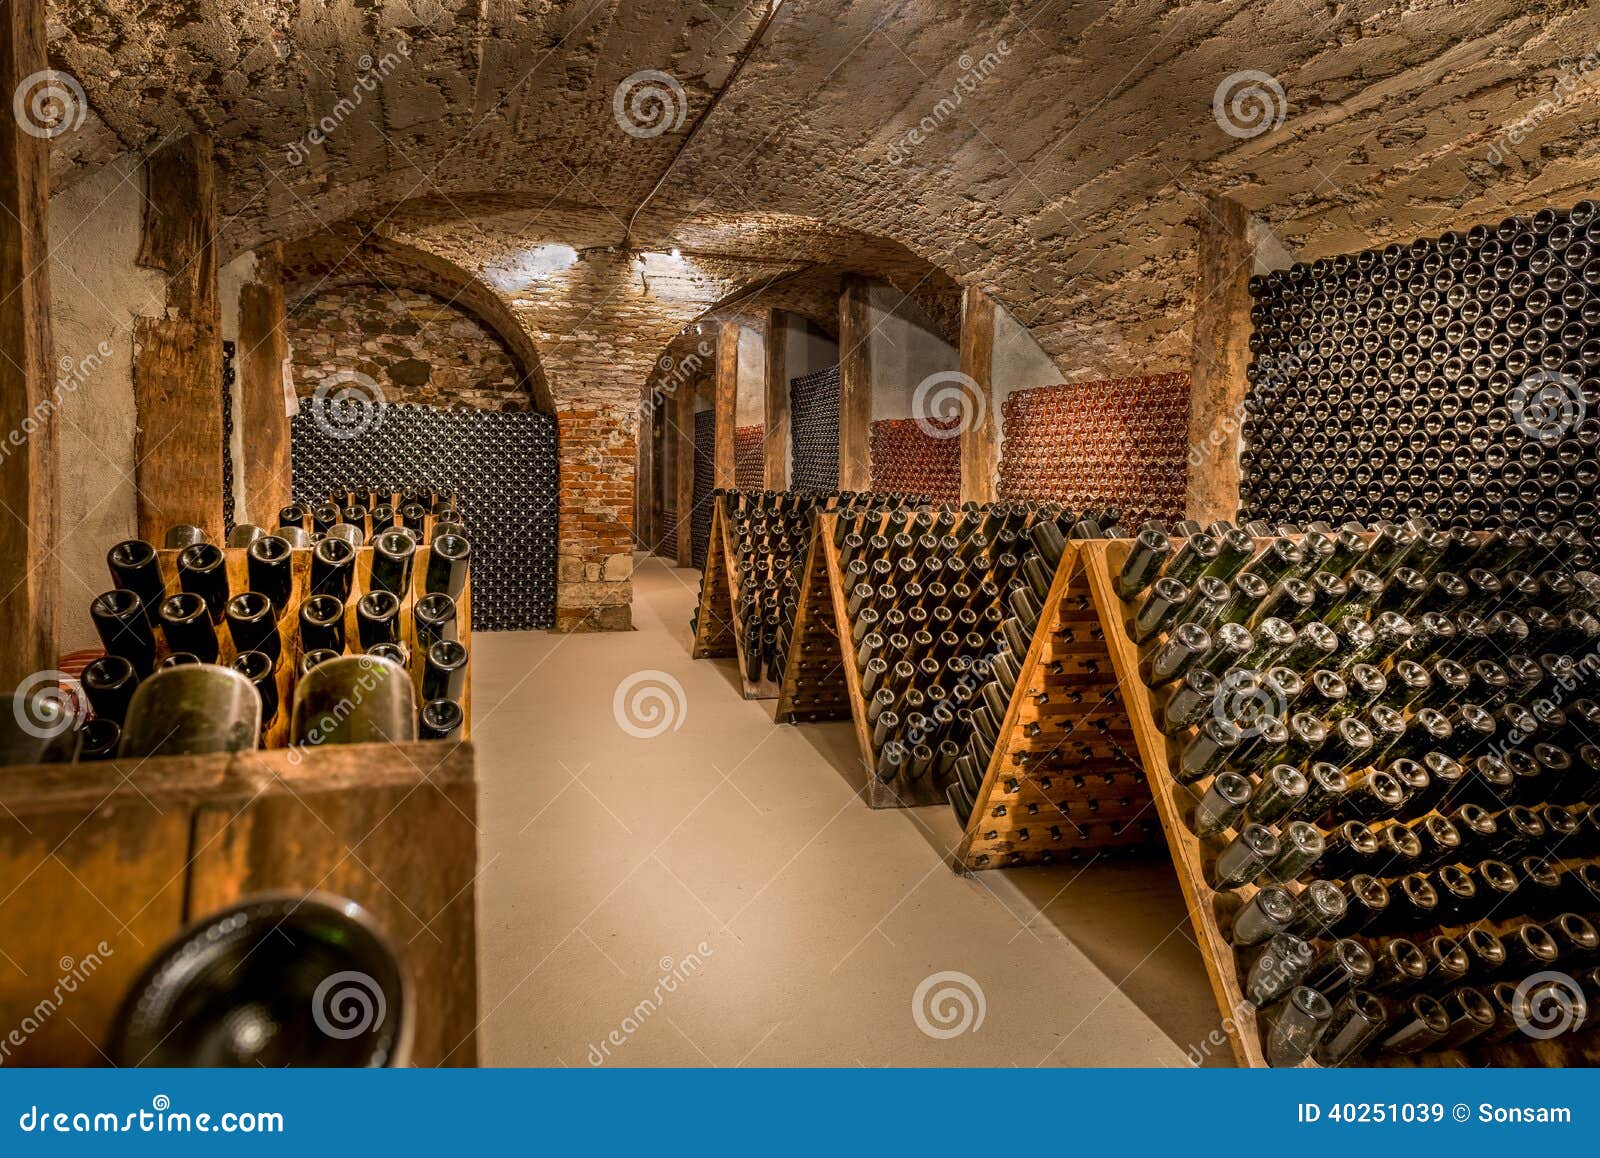 wine cellar, a row of champagne bottles